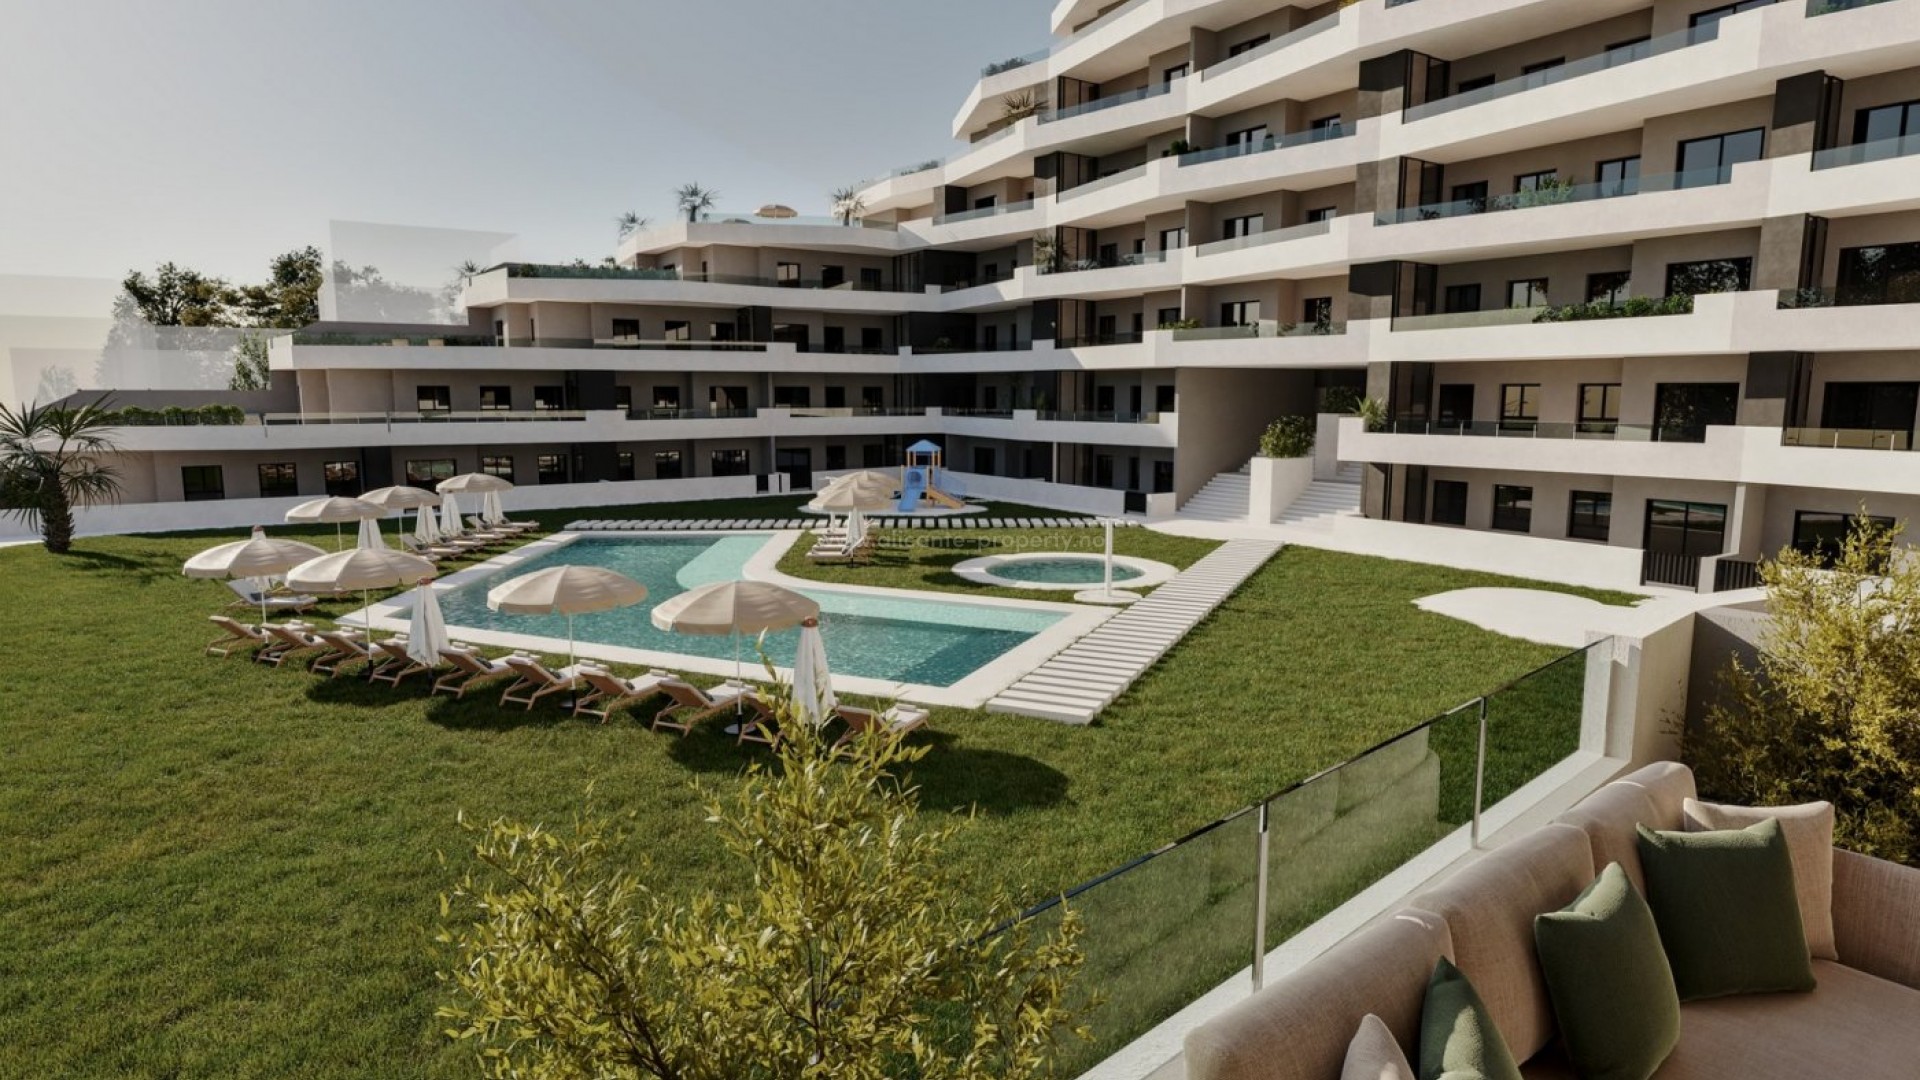 165 apartments in residential complex in San Miguel de Salinas, 2/3 bedrooms, communal swimming pool for adults and children, green areas, playground, near golf courses